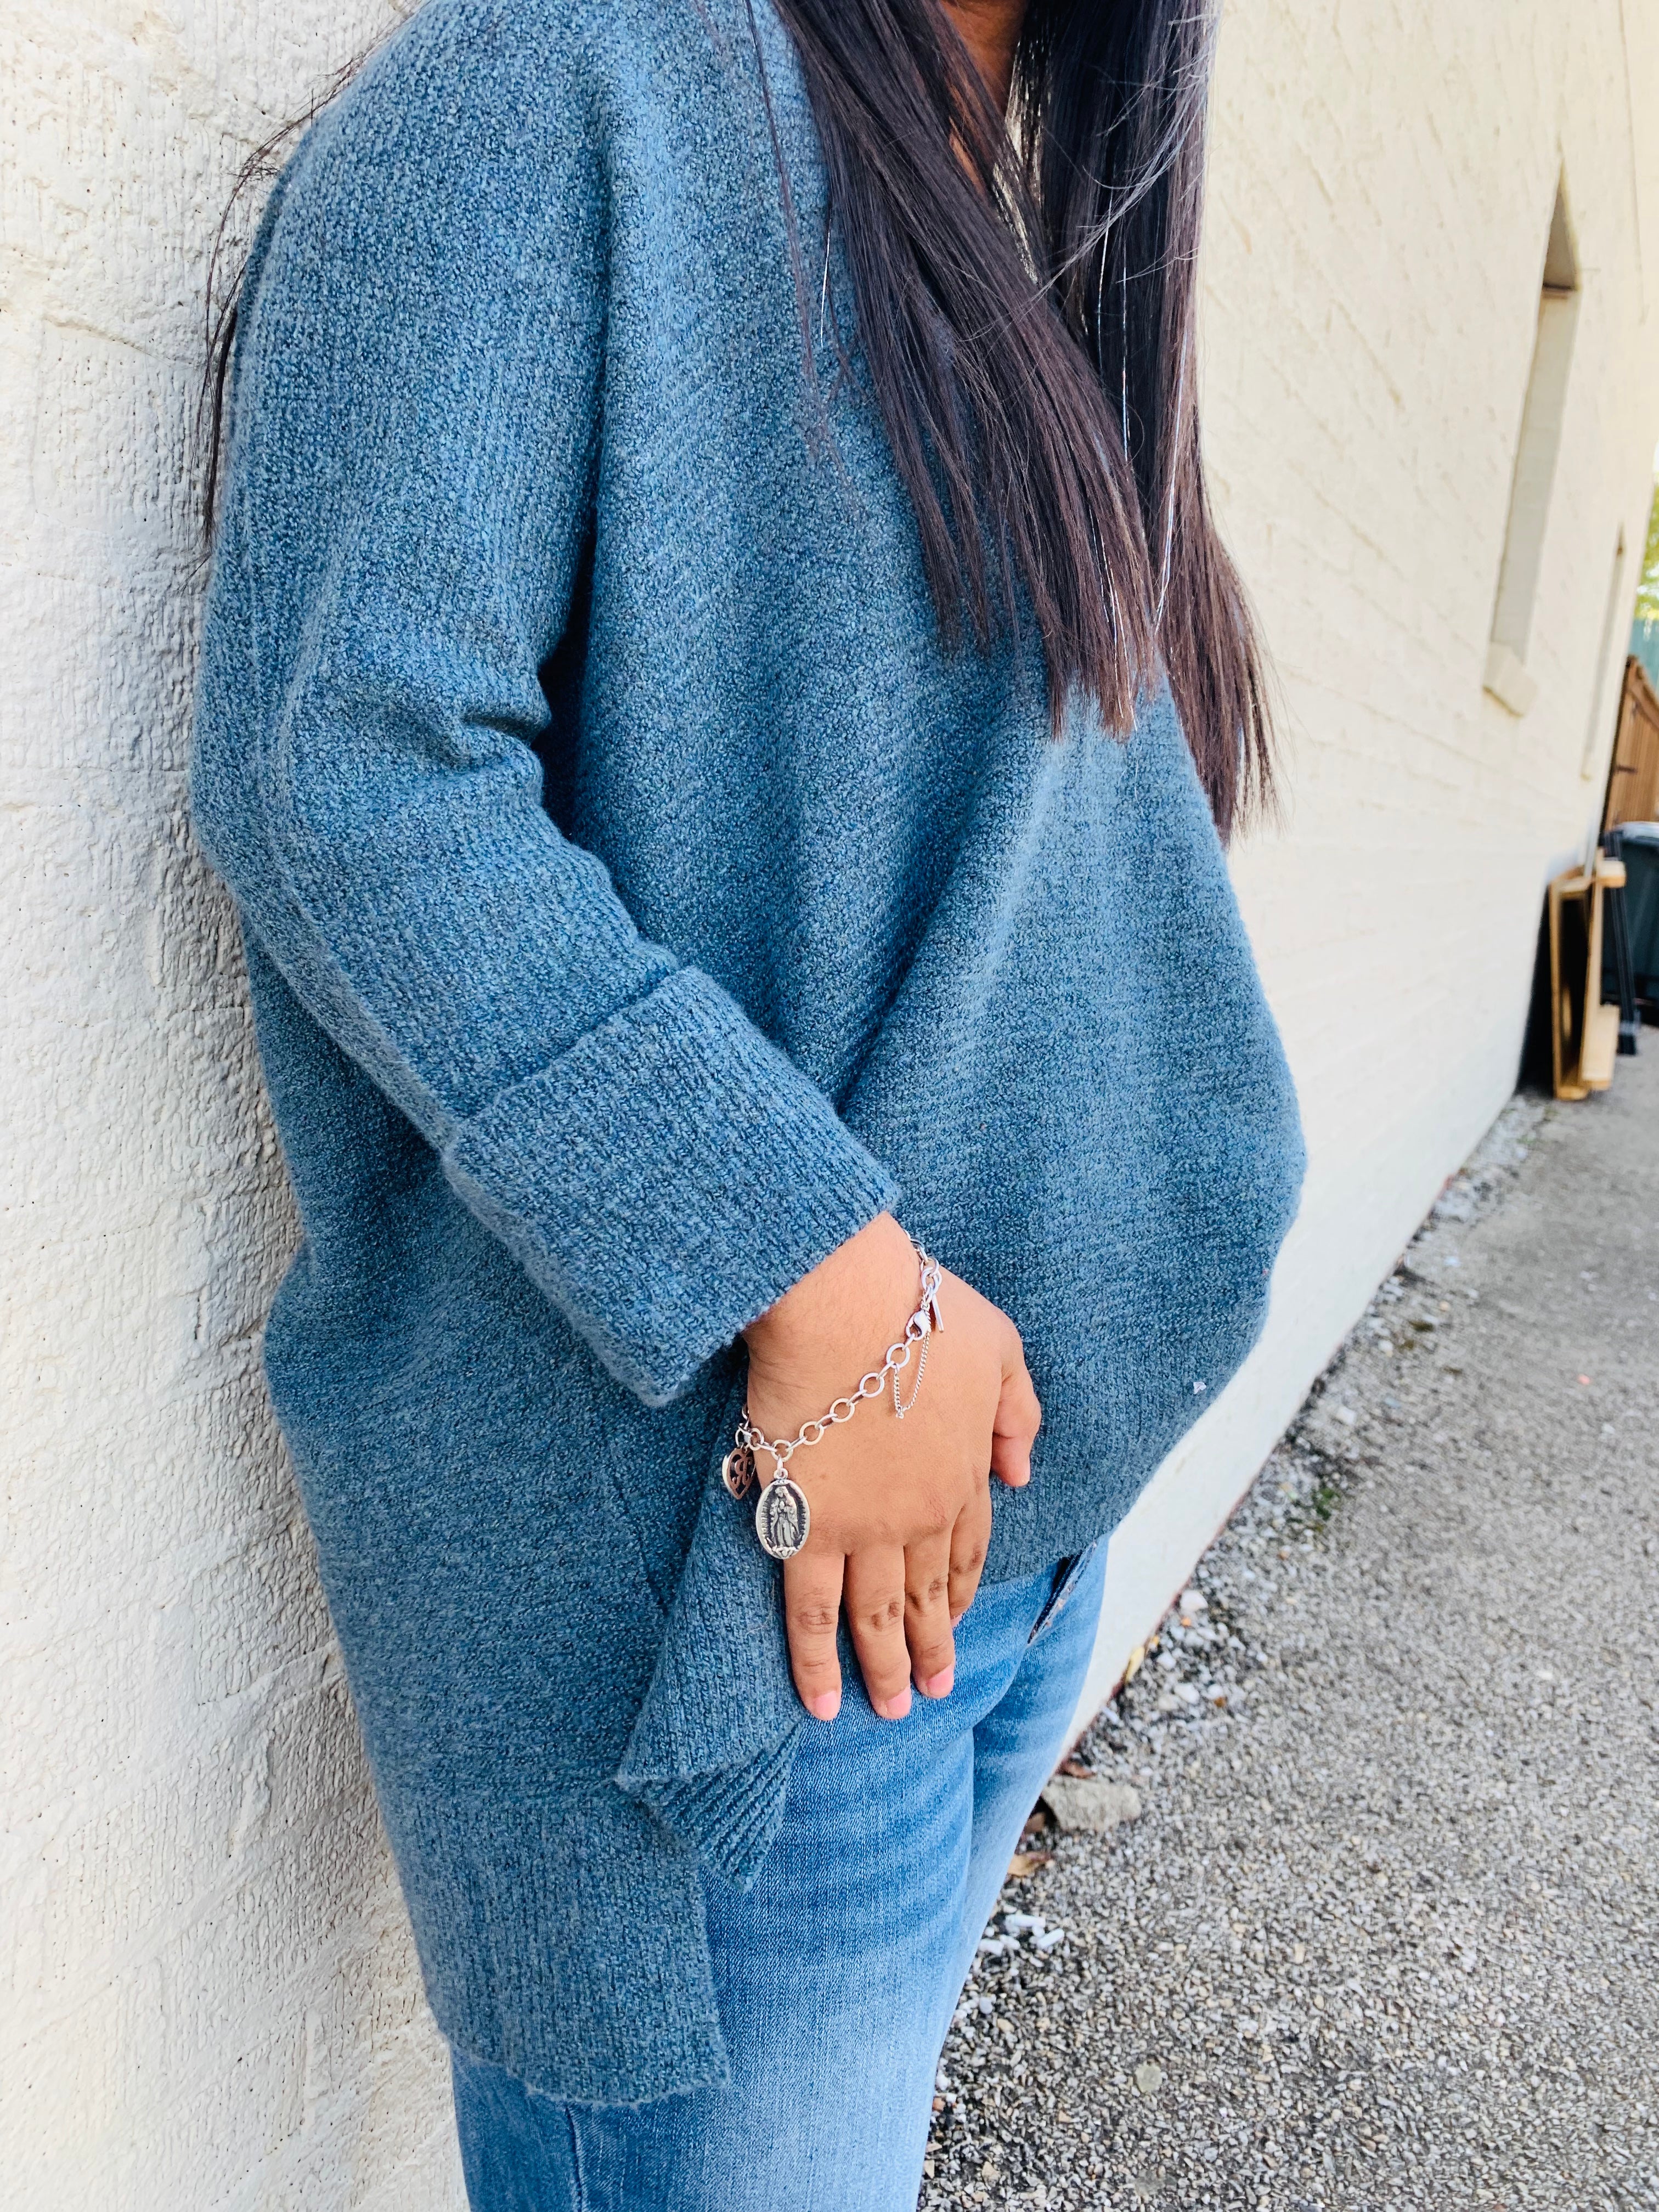 Running A Little Late Teal Oversized Sweater Top